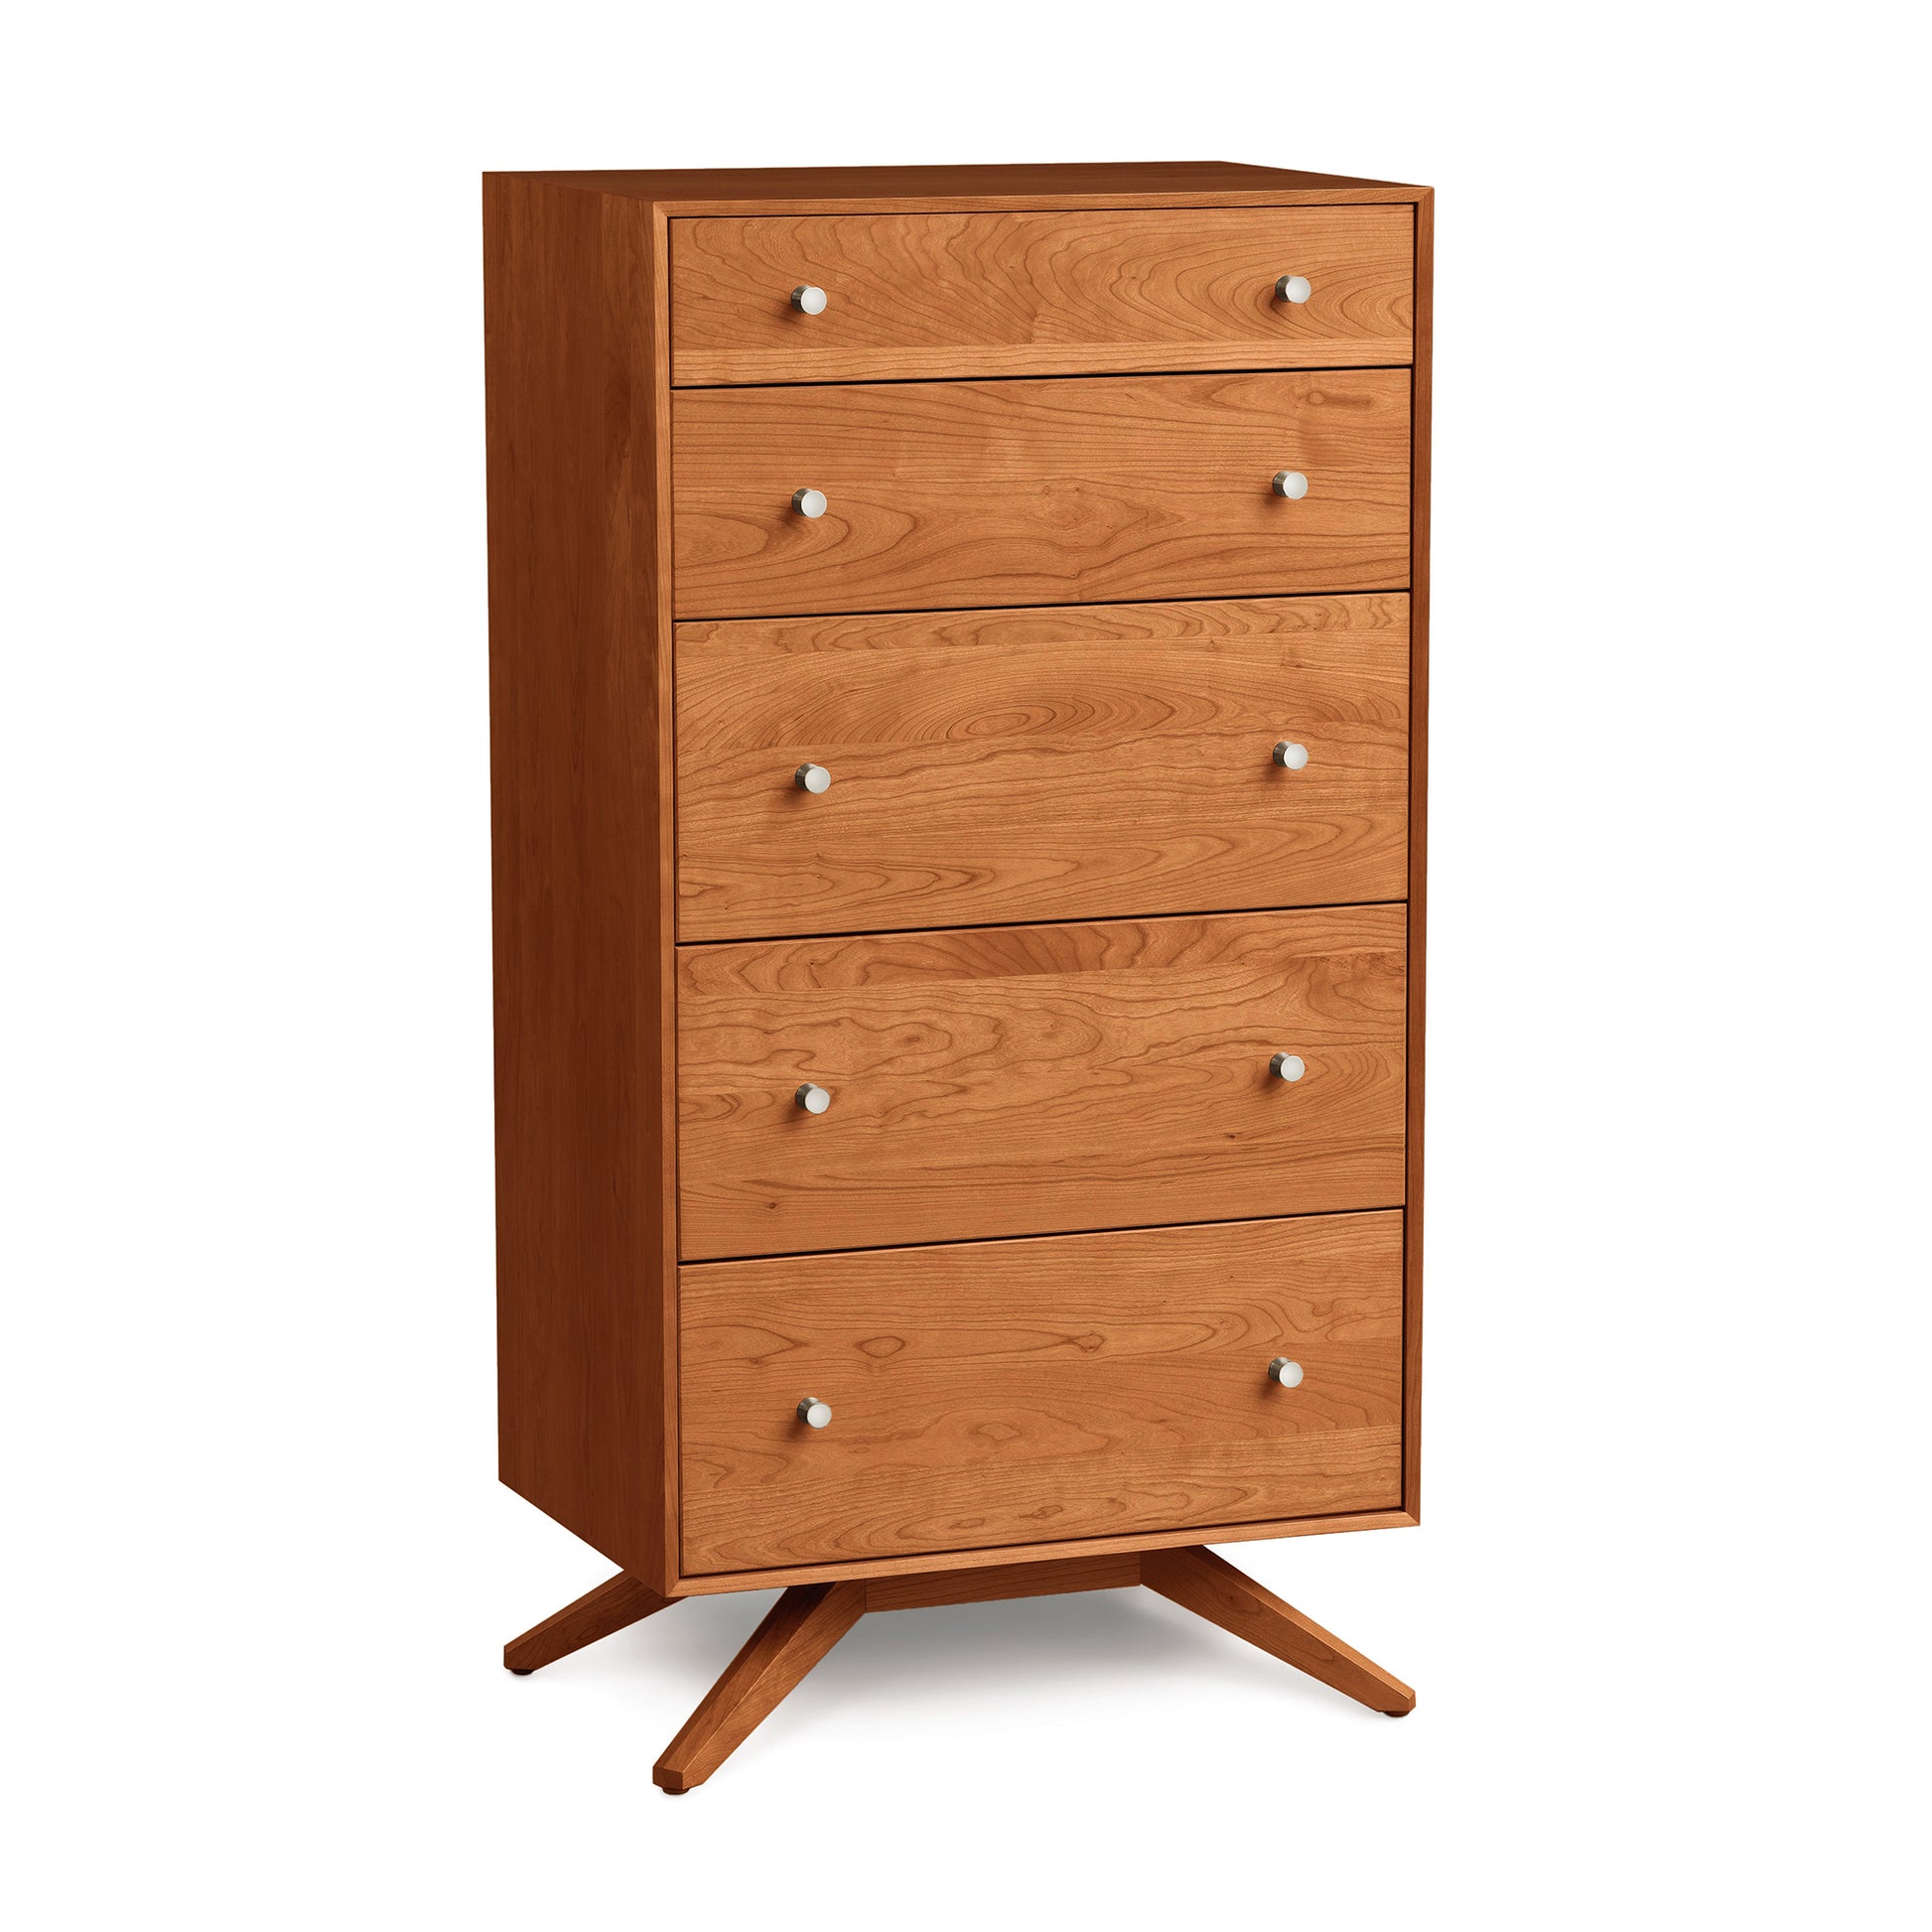 A solid cherry hardwood mid-century modern style tall dresser with five drawers and splayed legs, known as the Copeland Furniture Astrid 5-Drawer Chest, features a contemporary design.